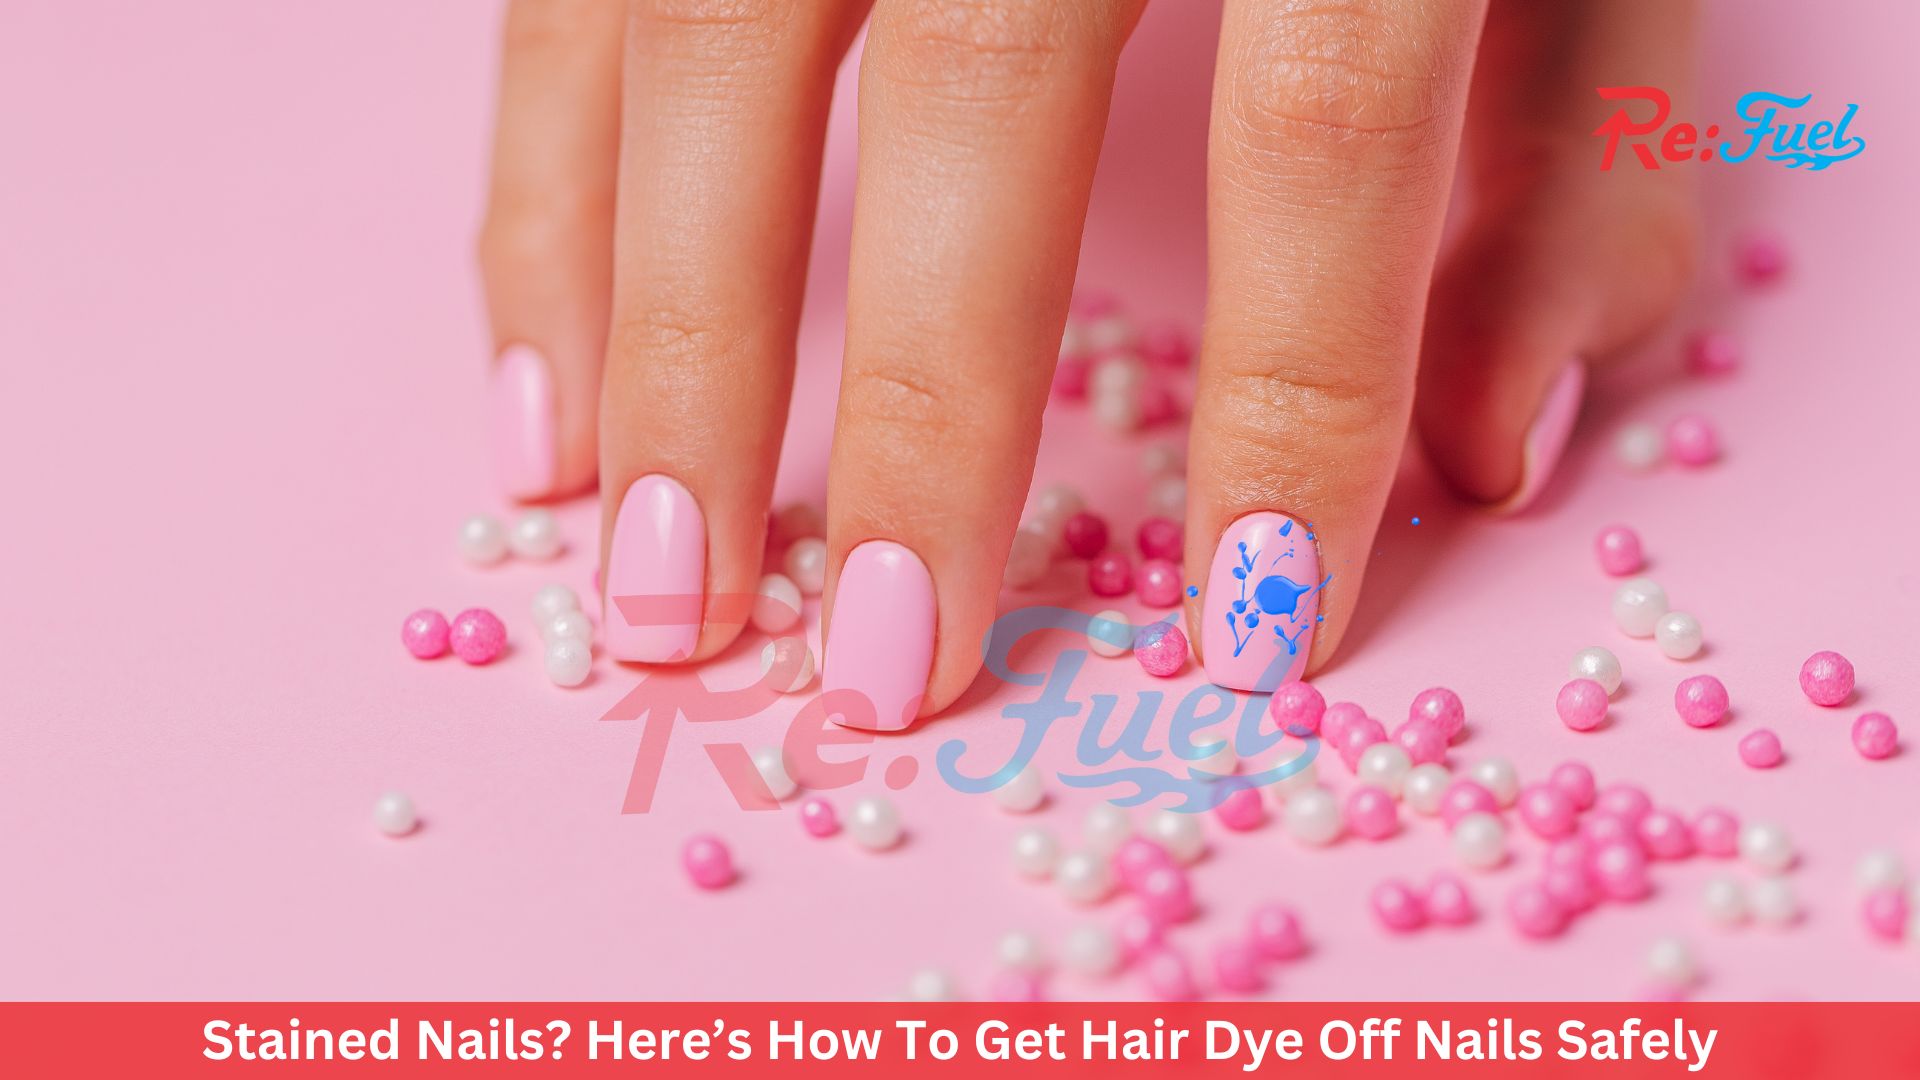 Stained Nails? Here’s How To Get Hair Dye Off Nails Safely